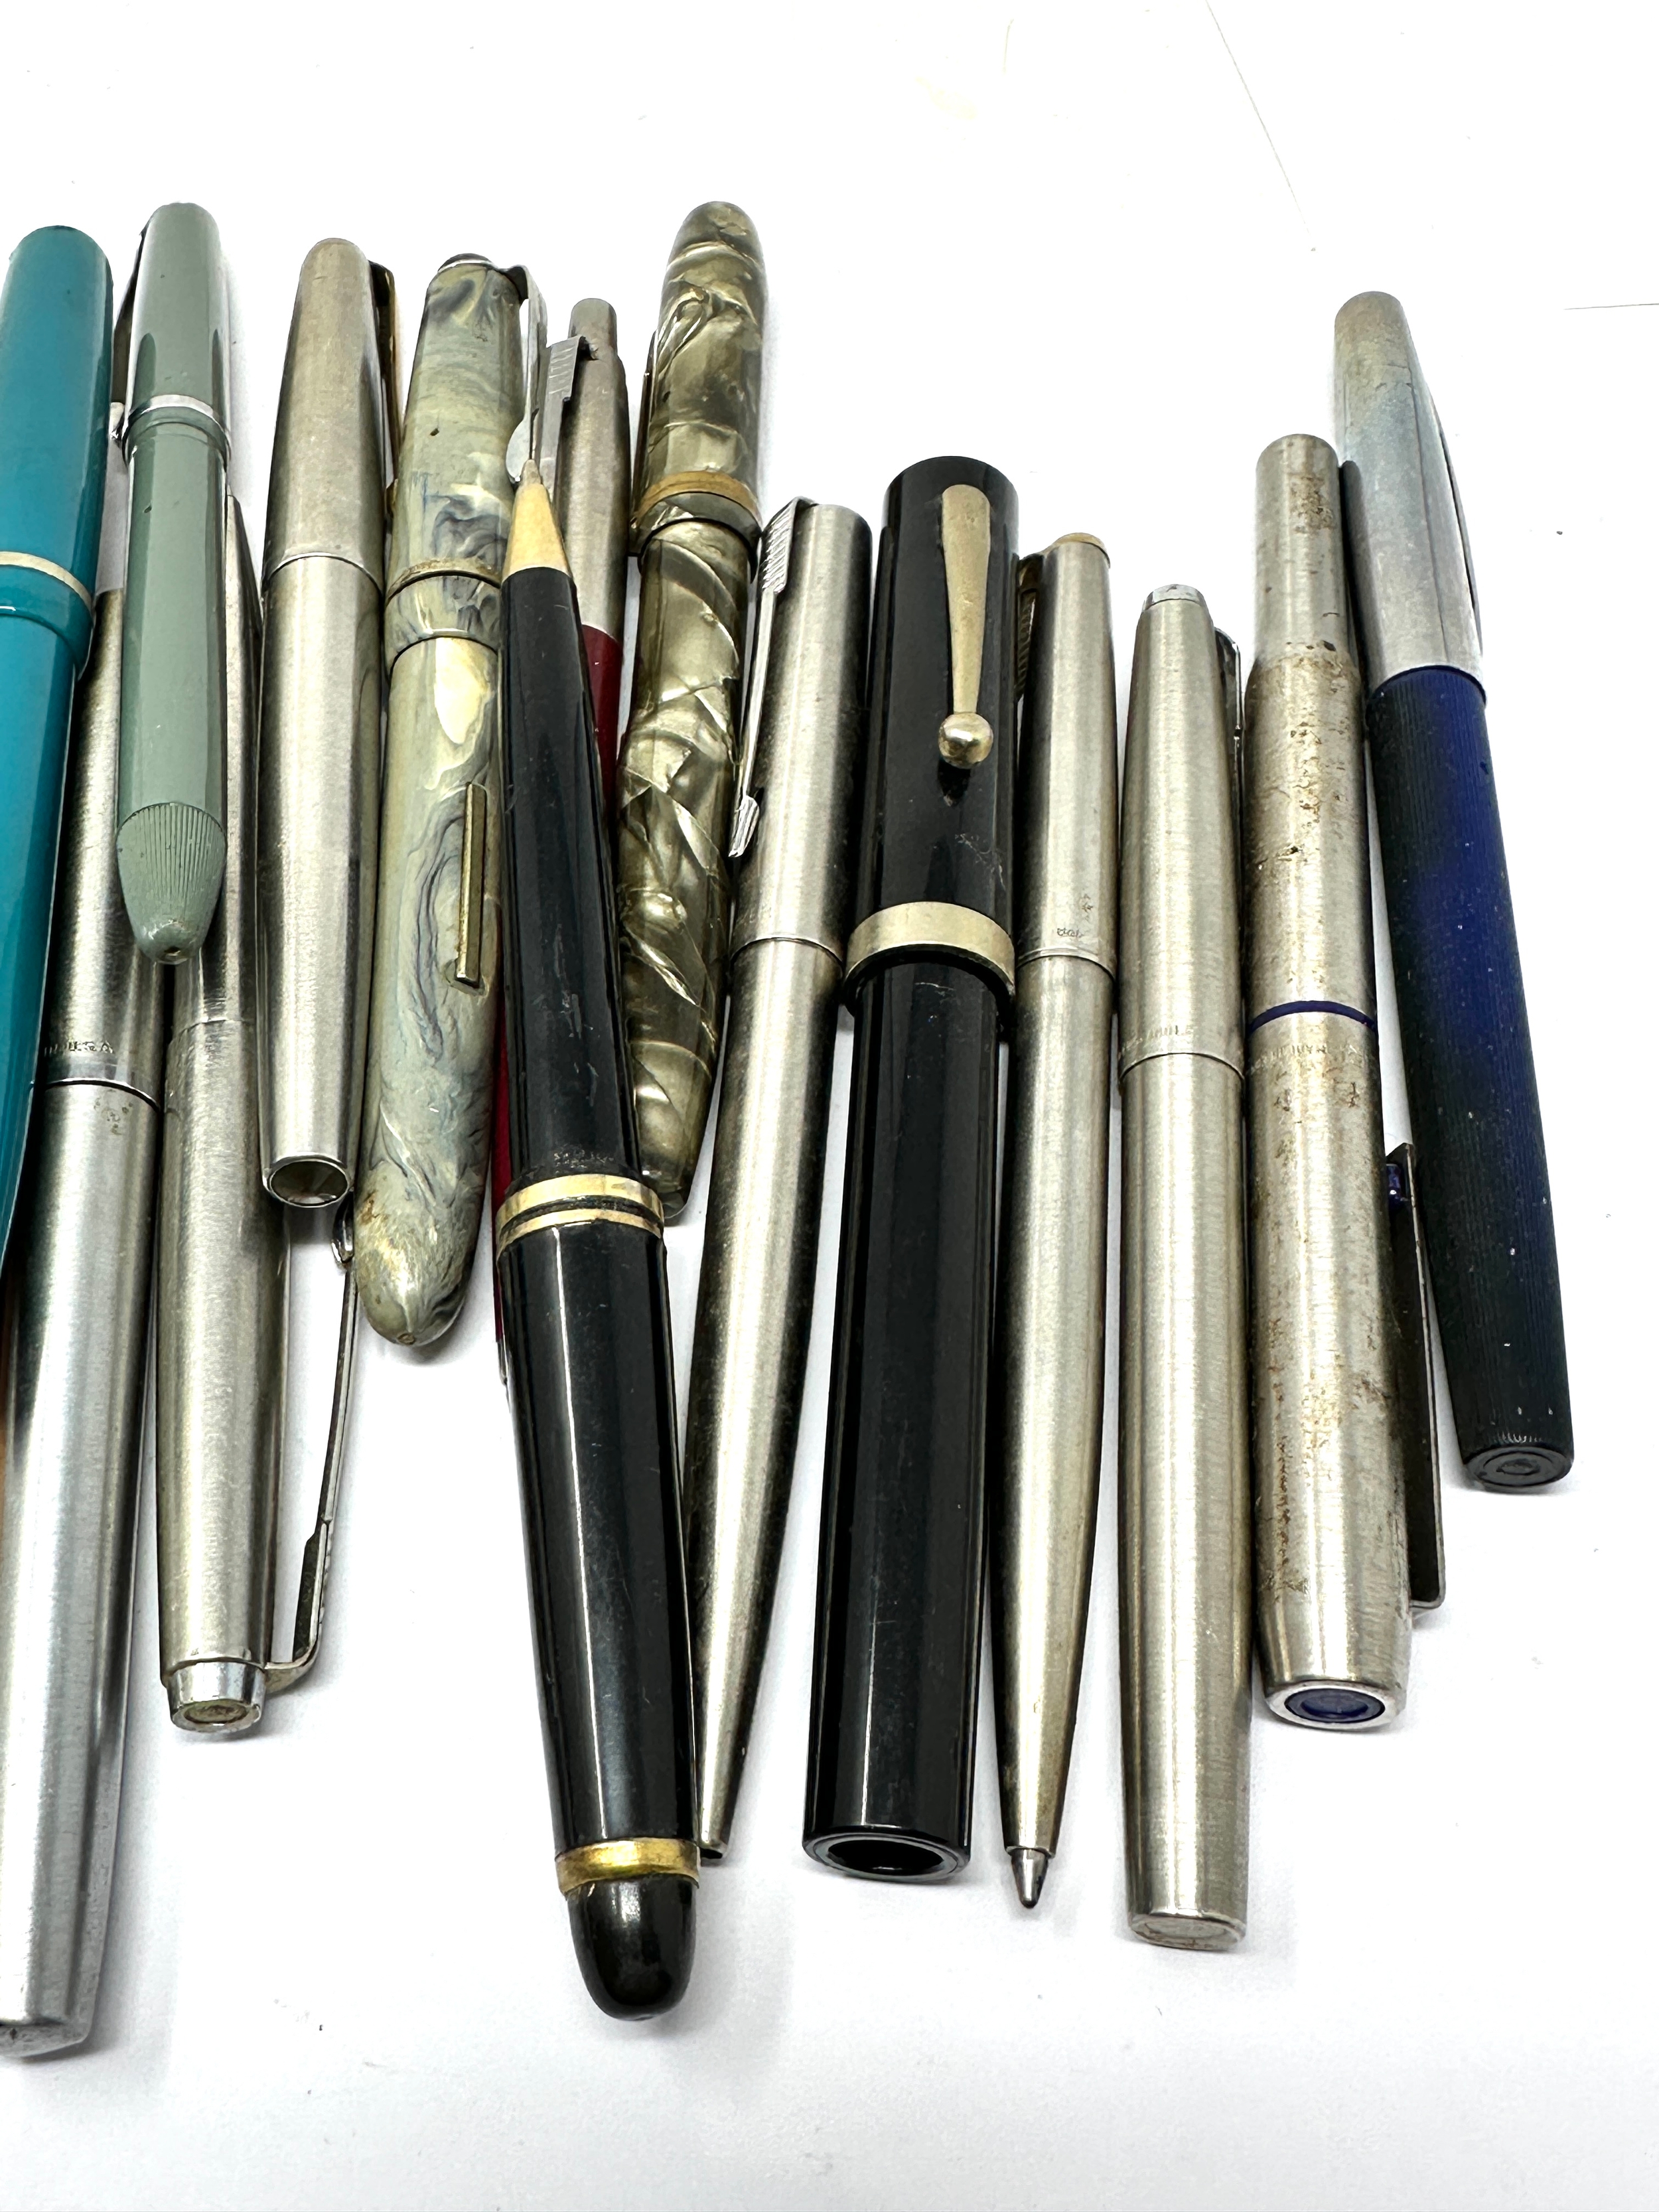 very large selection of vintage fountain pend & pens - Image 4 of 4